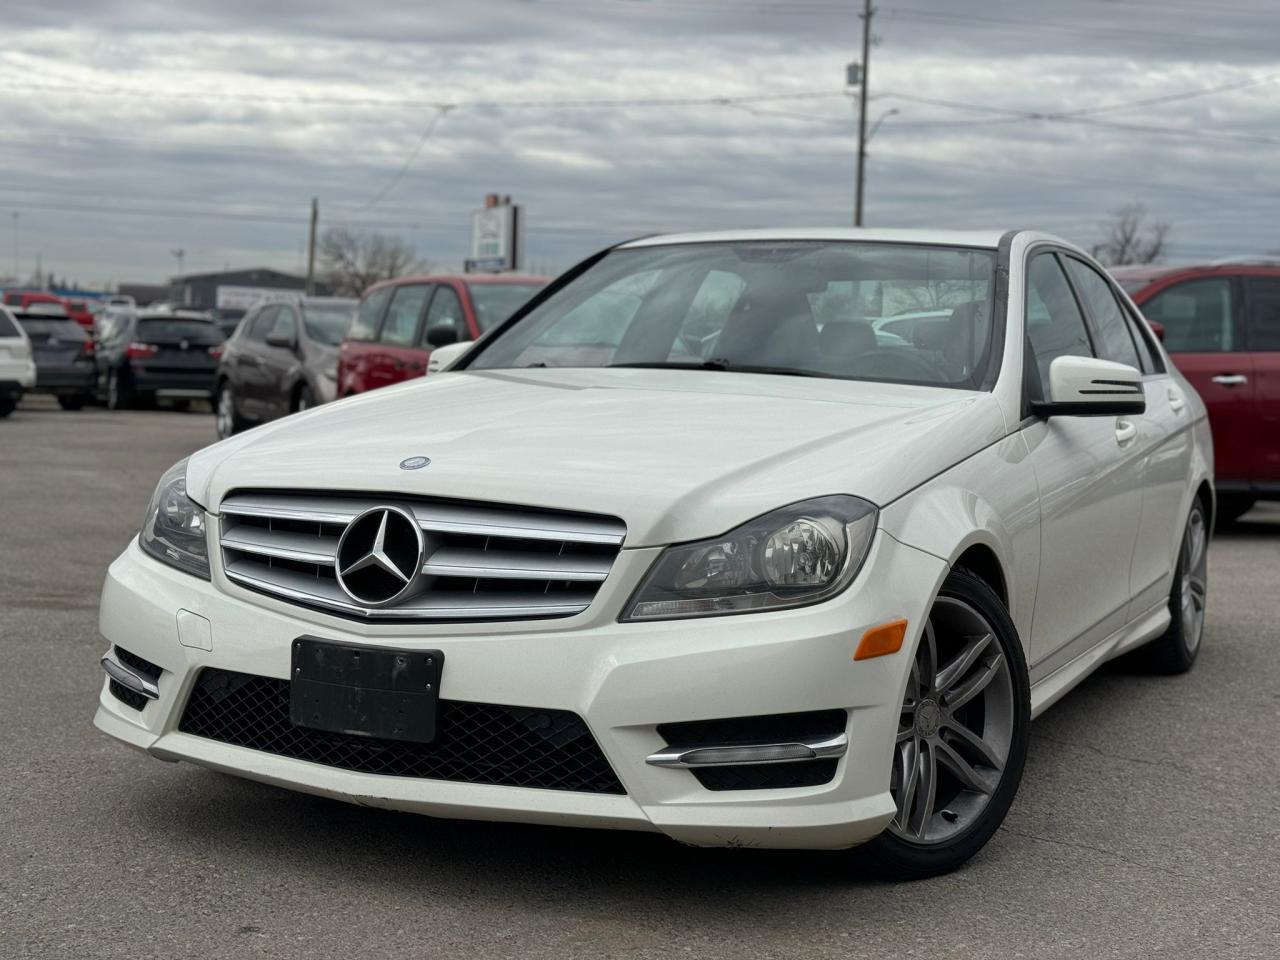 2012 Mercedes-Benz C-Class C 250 4MATIC / HTD LEATHER SEATS / SUNROOF